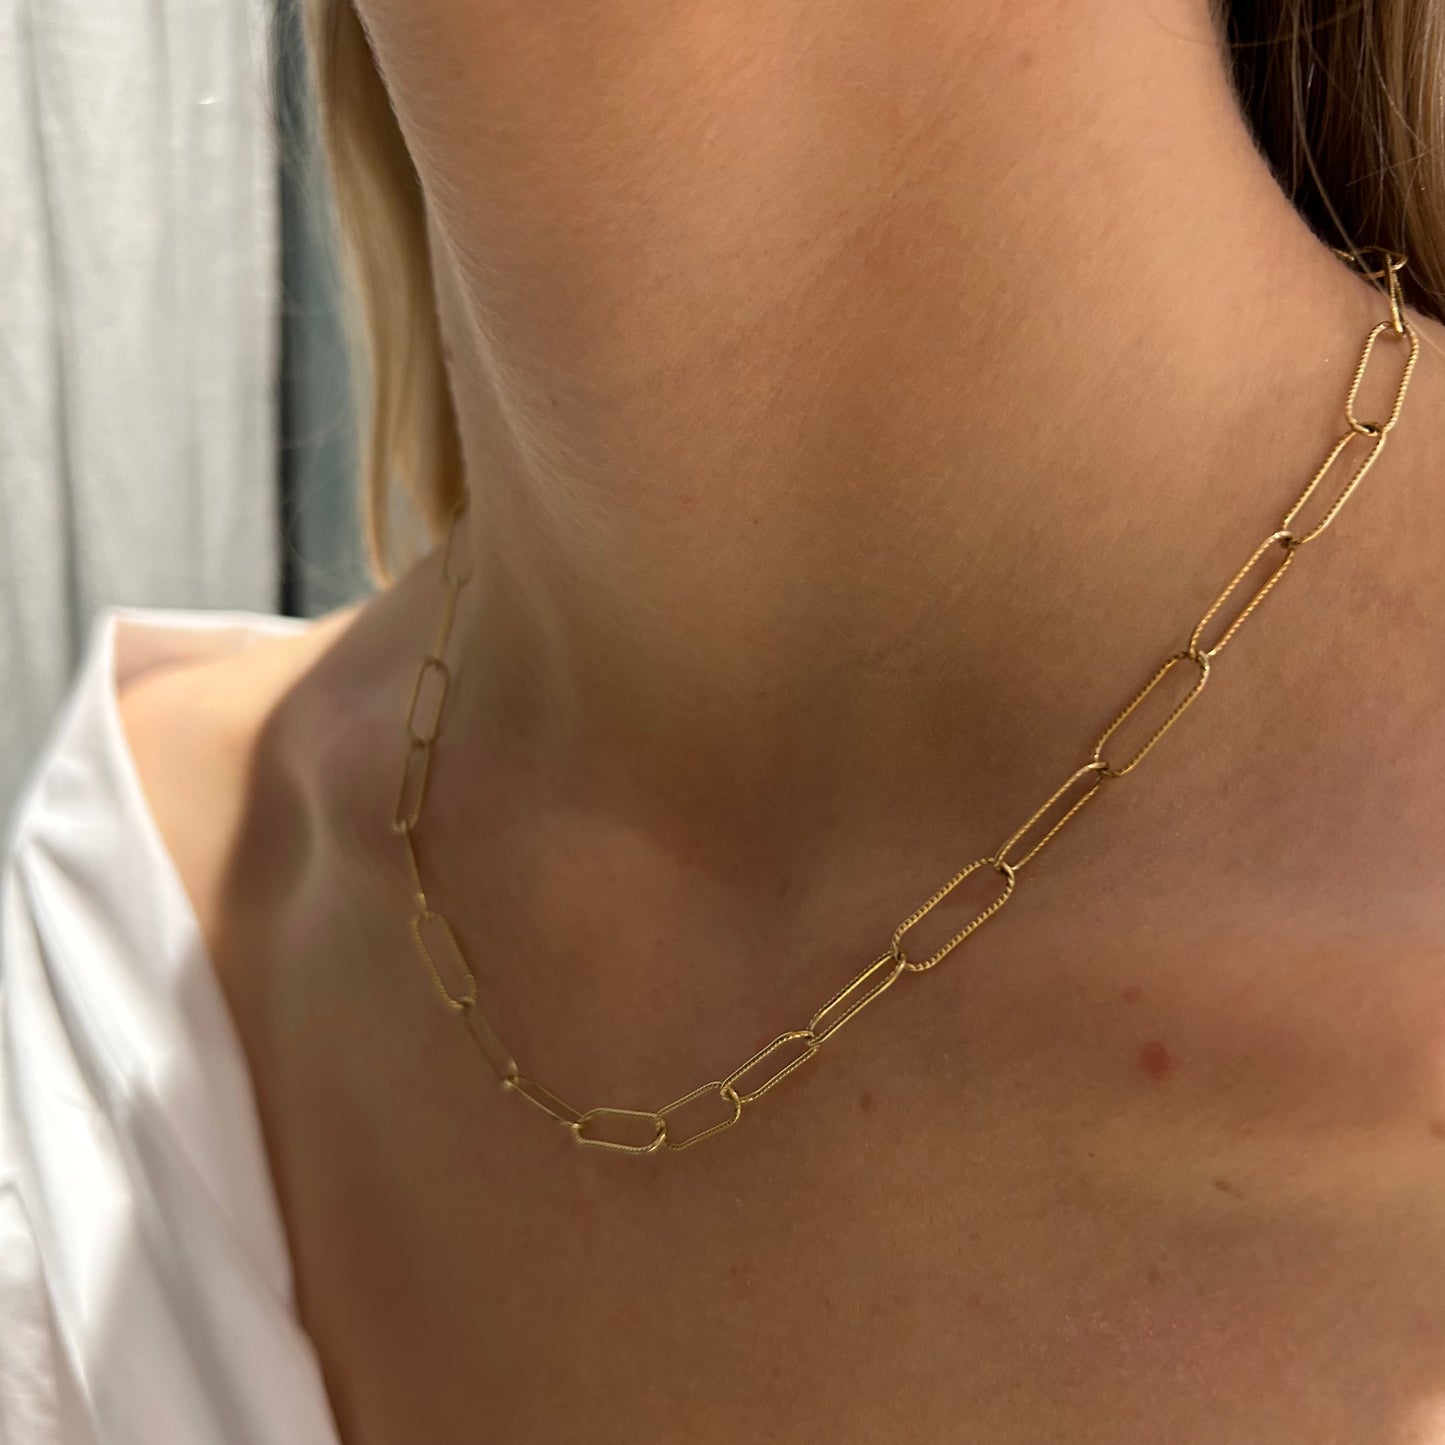 Textured paper clip chain, 14k gold filled necklace